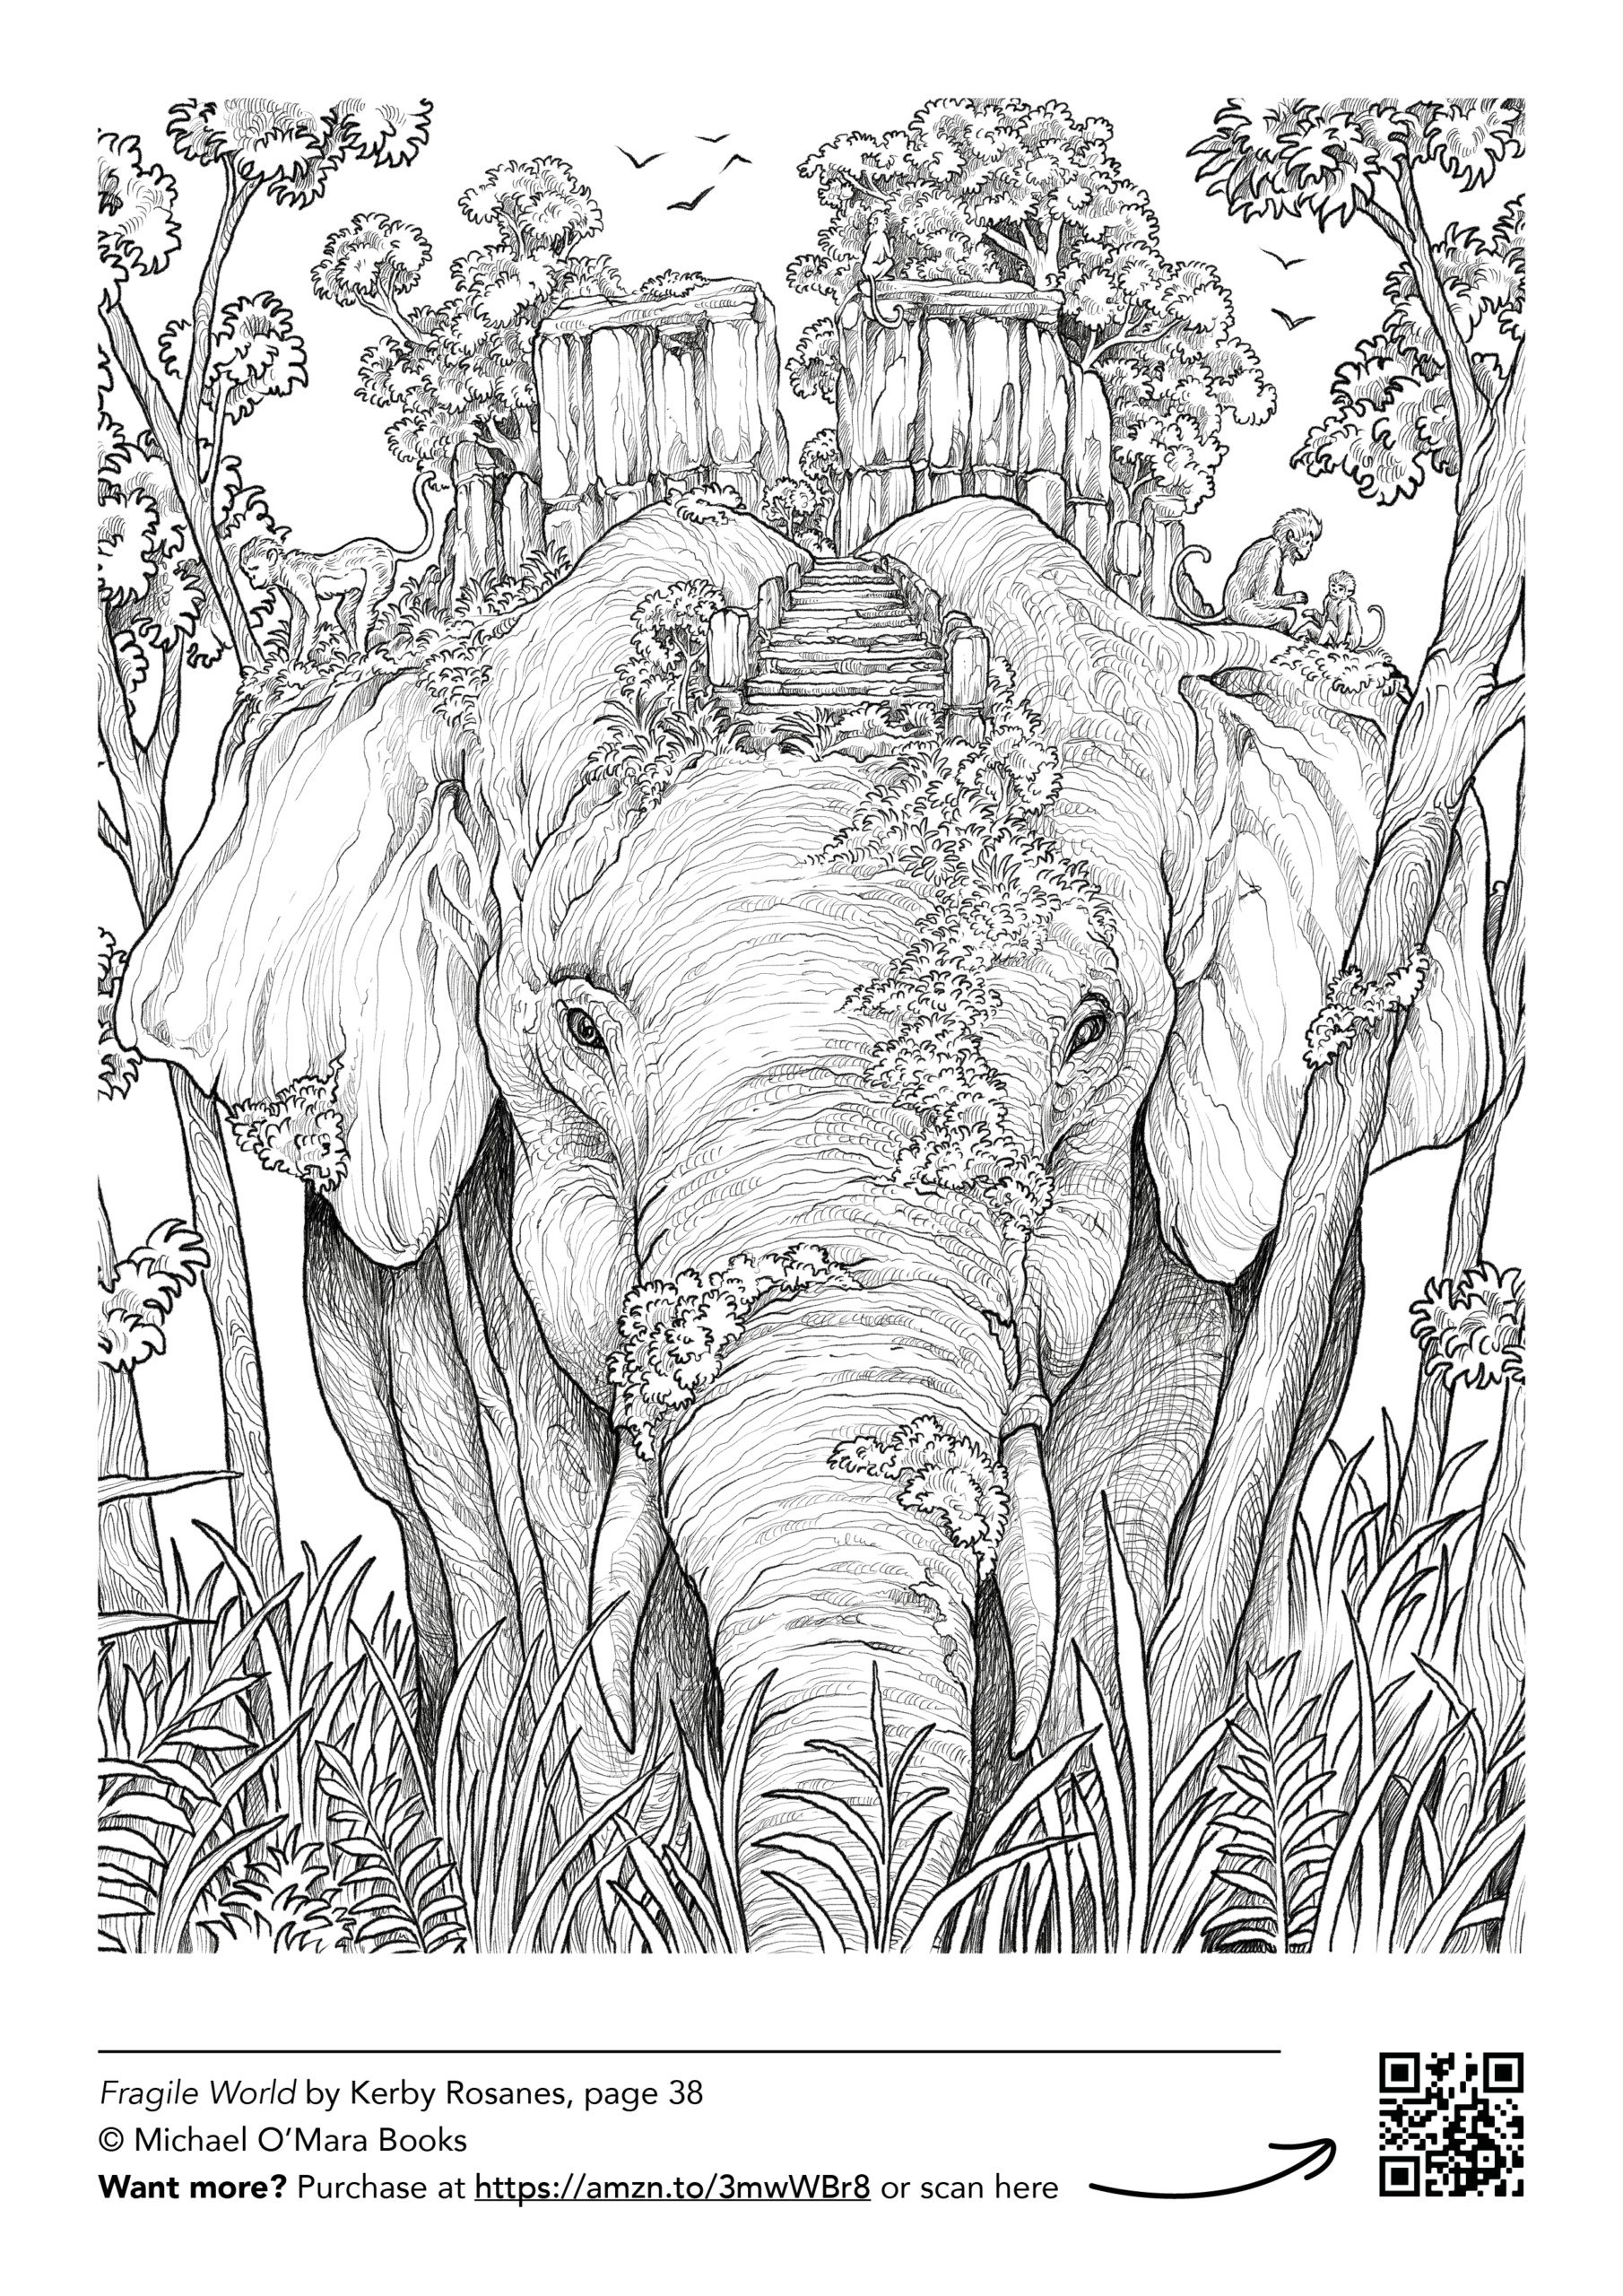 Free Downloadable Colouring Pages for Adults - Michael O'Mara Books